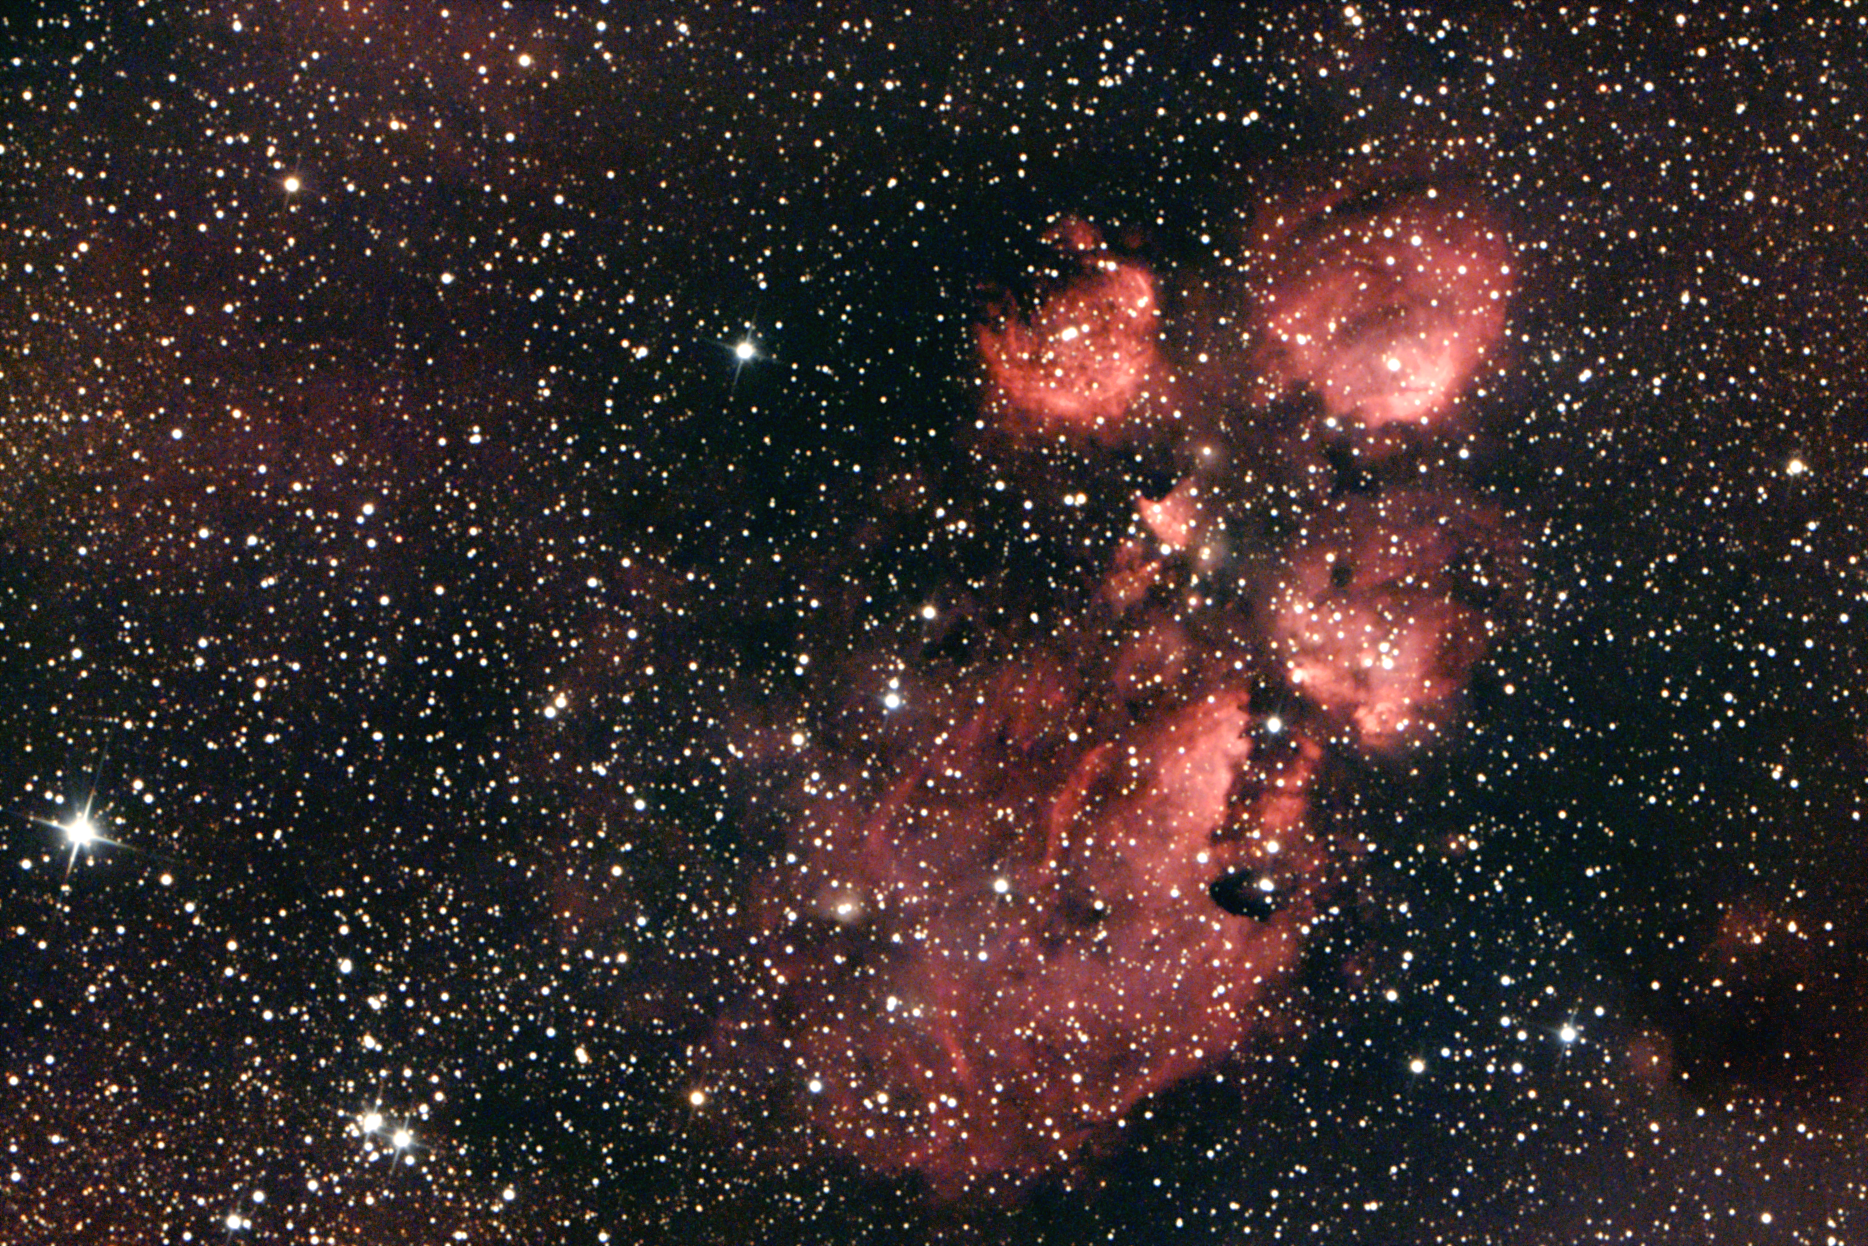 r_proc_NGC6334_stacked_373poses_miror,grad_photom_gimp_bin2_plus_rouge.png.d101bf693113f44df7259234f469e22e.png